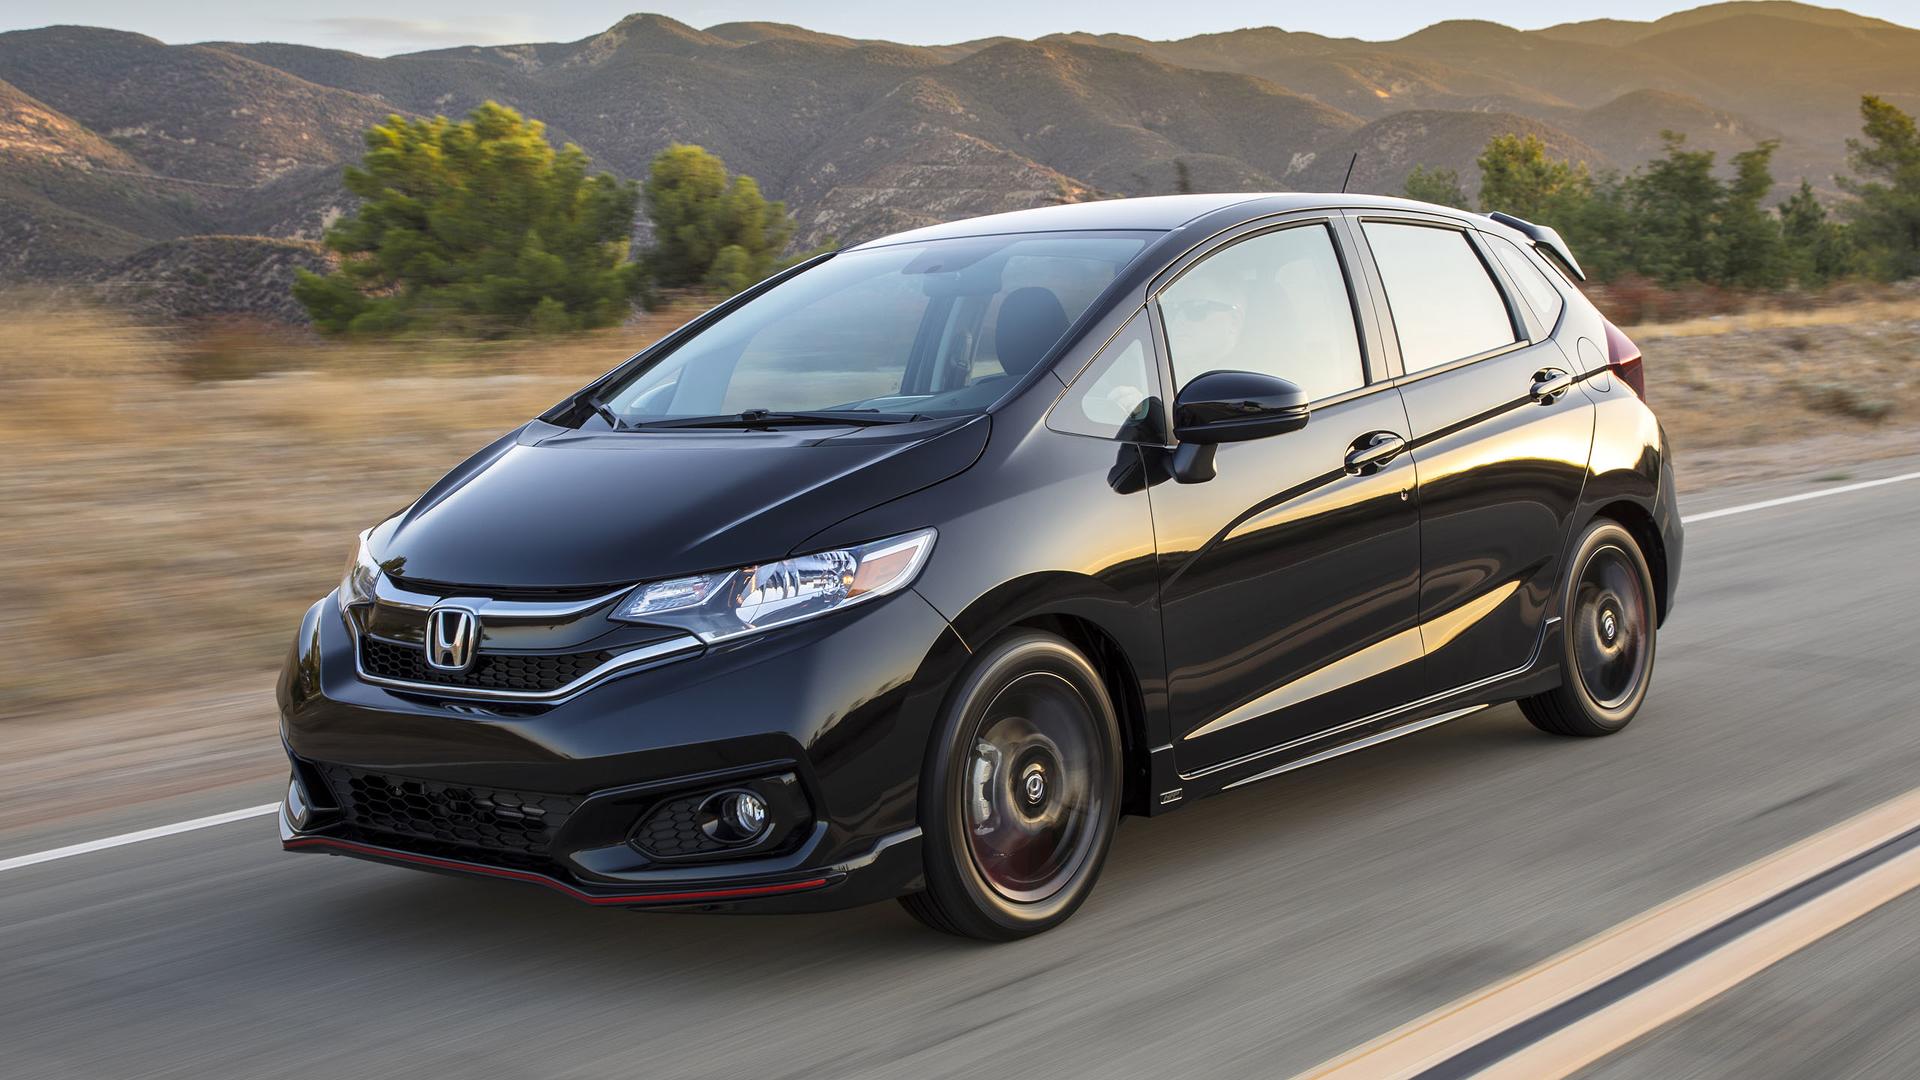 2018 Honda Fit First Drive: Putting The Fun Back In Functional